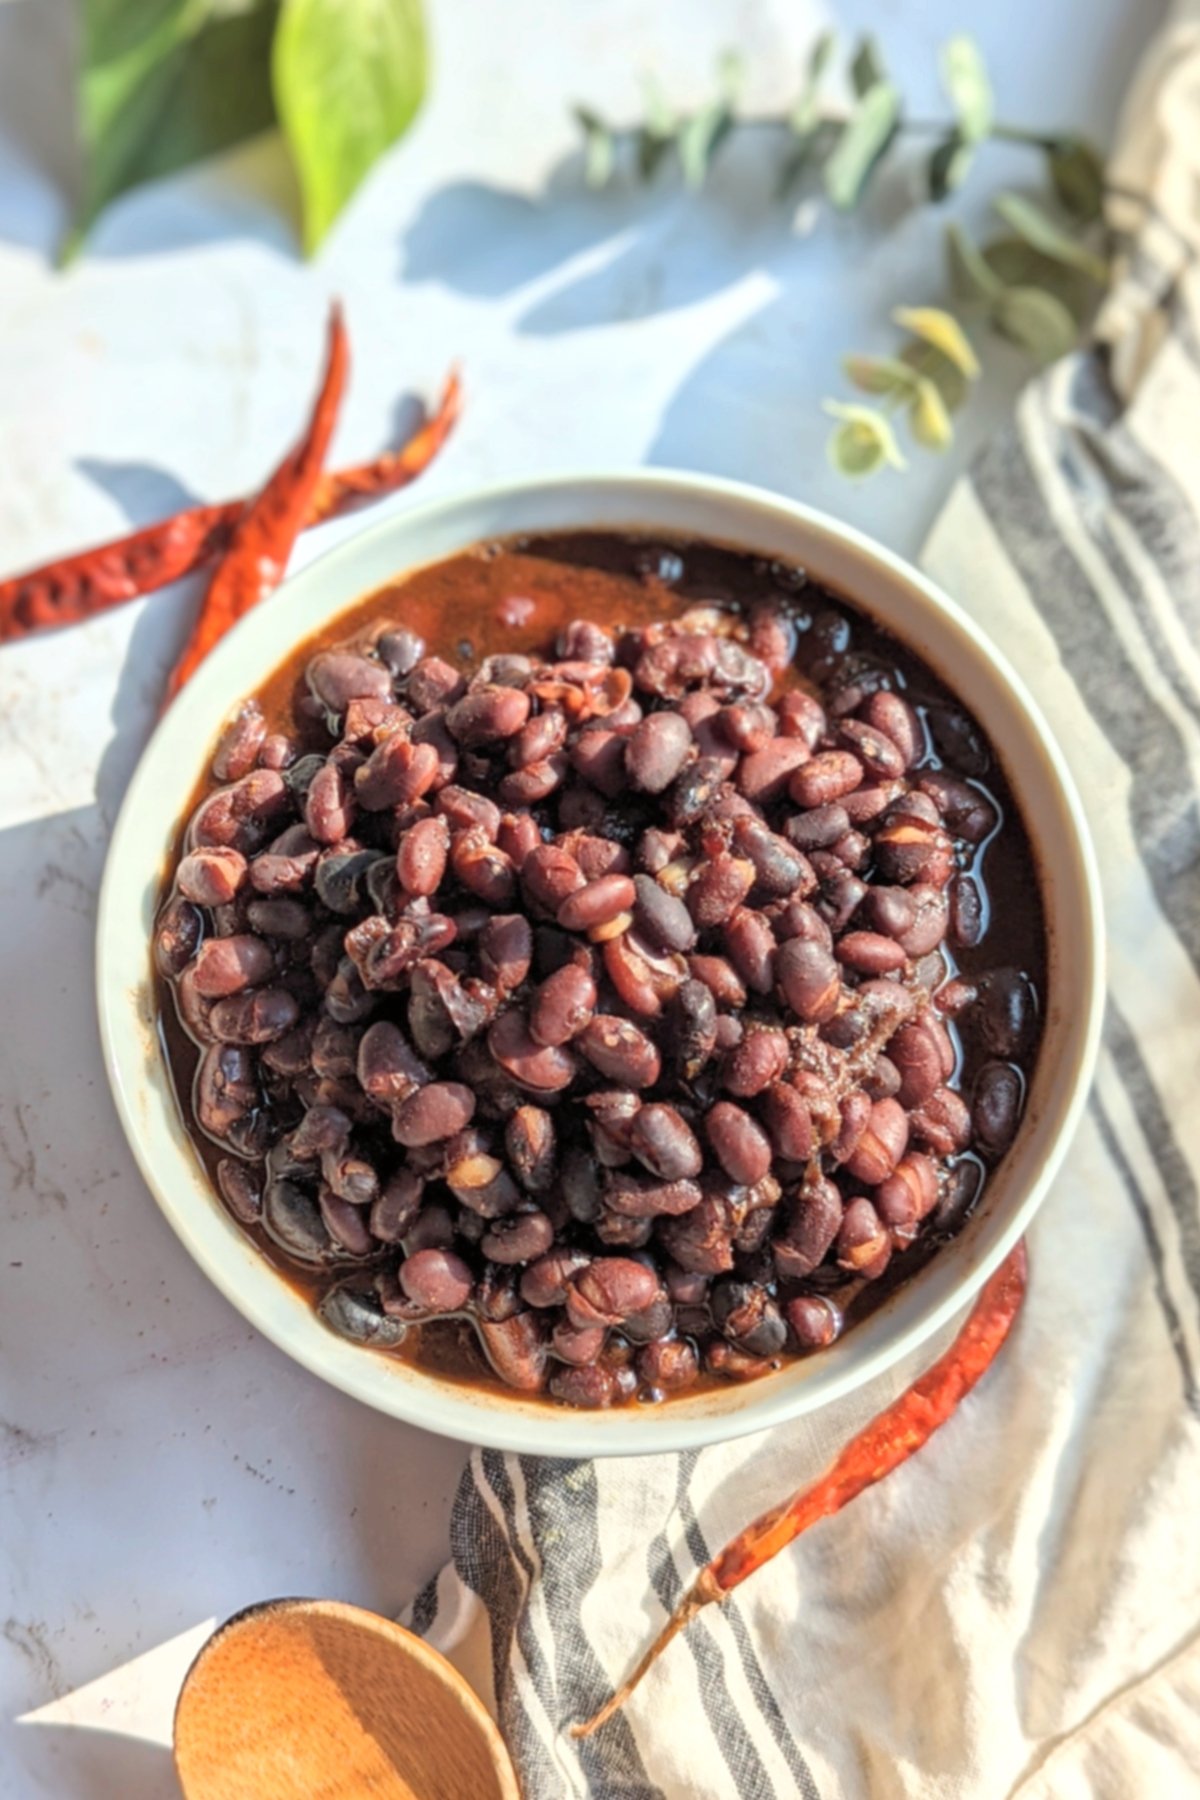 chipotle copycat black beans recipe healthy homemade black beans dried or canned beans for burritos or burrito bowls